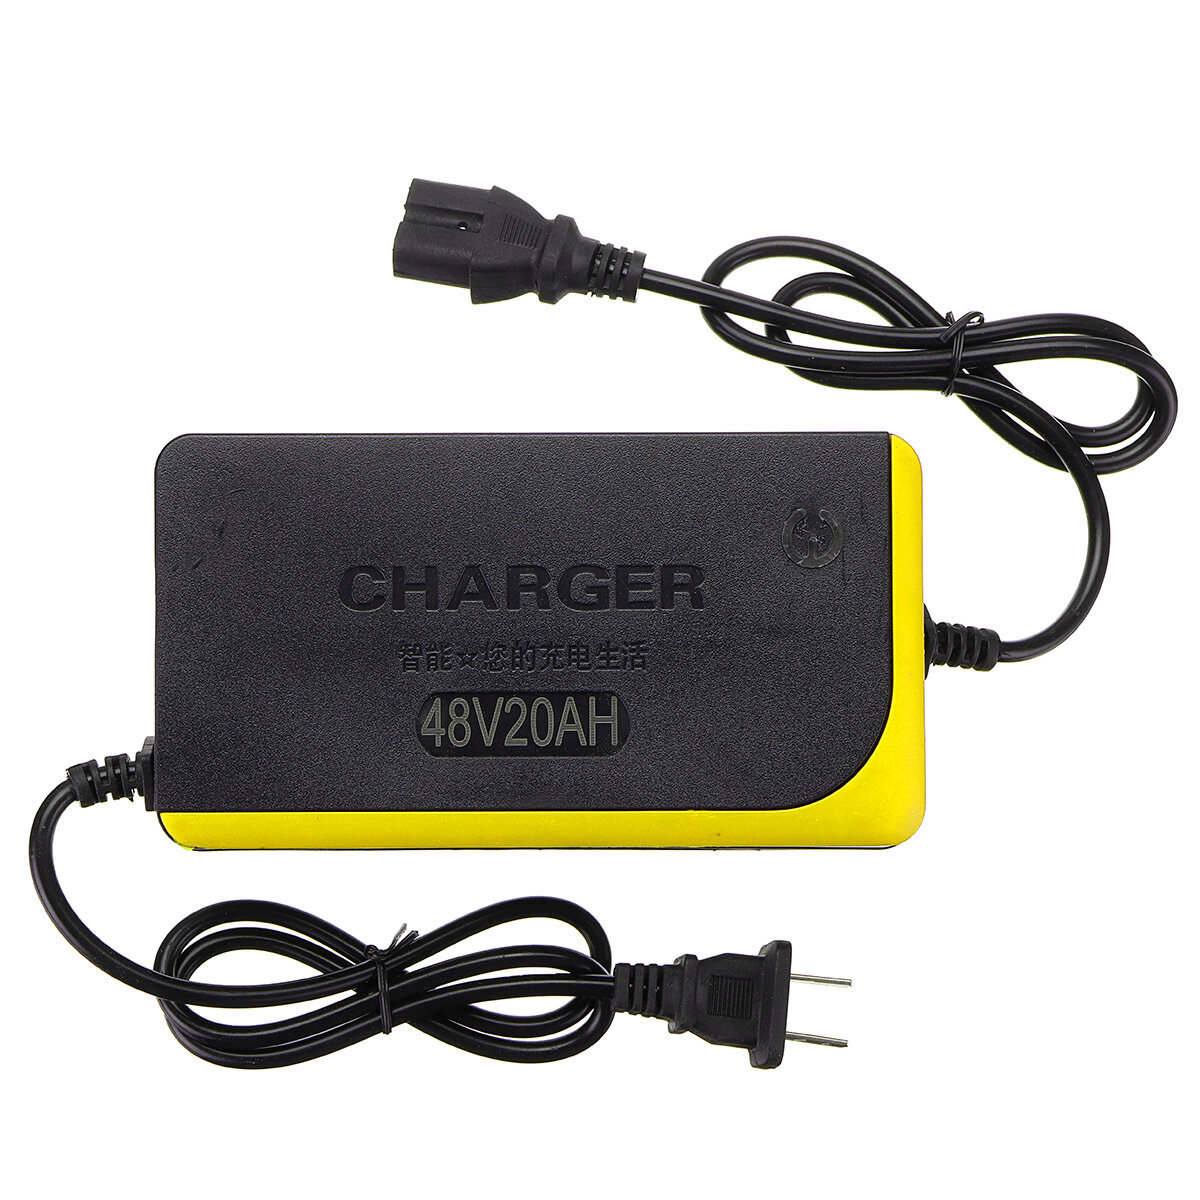 

48V 20AH 1.8-5.0A Electric Bike Scooter Lead Acid Battery Charger Power Adapter